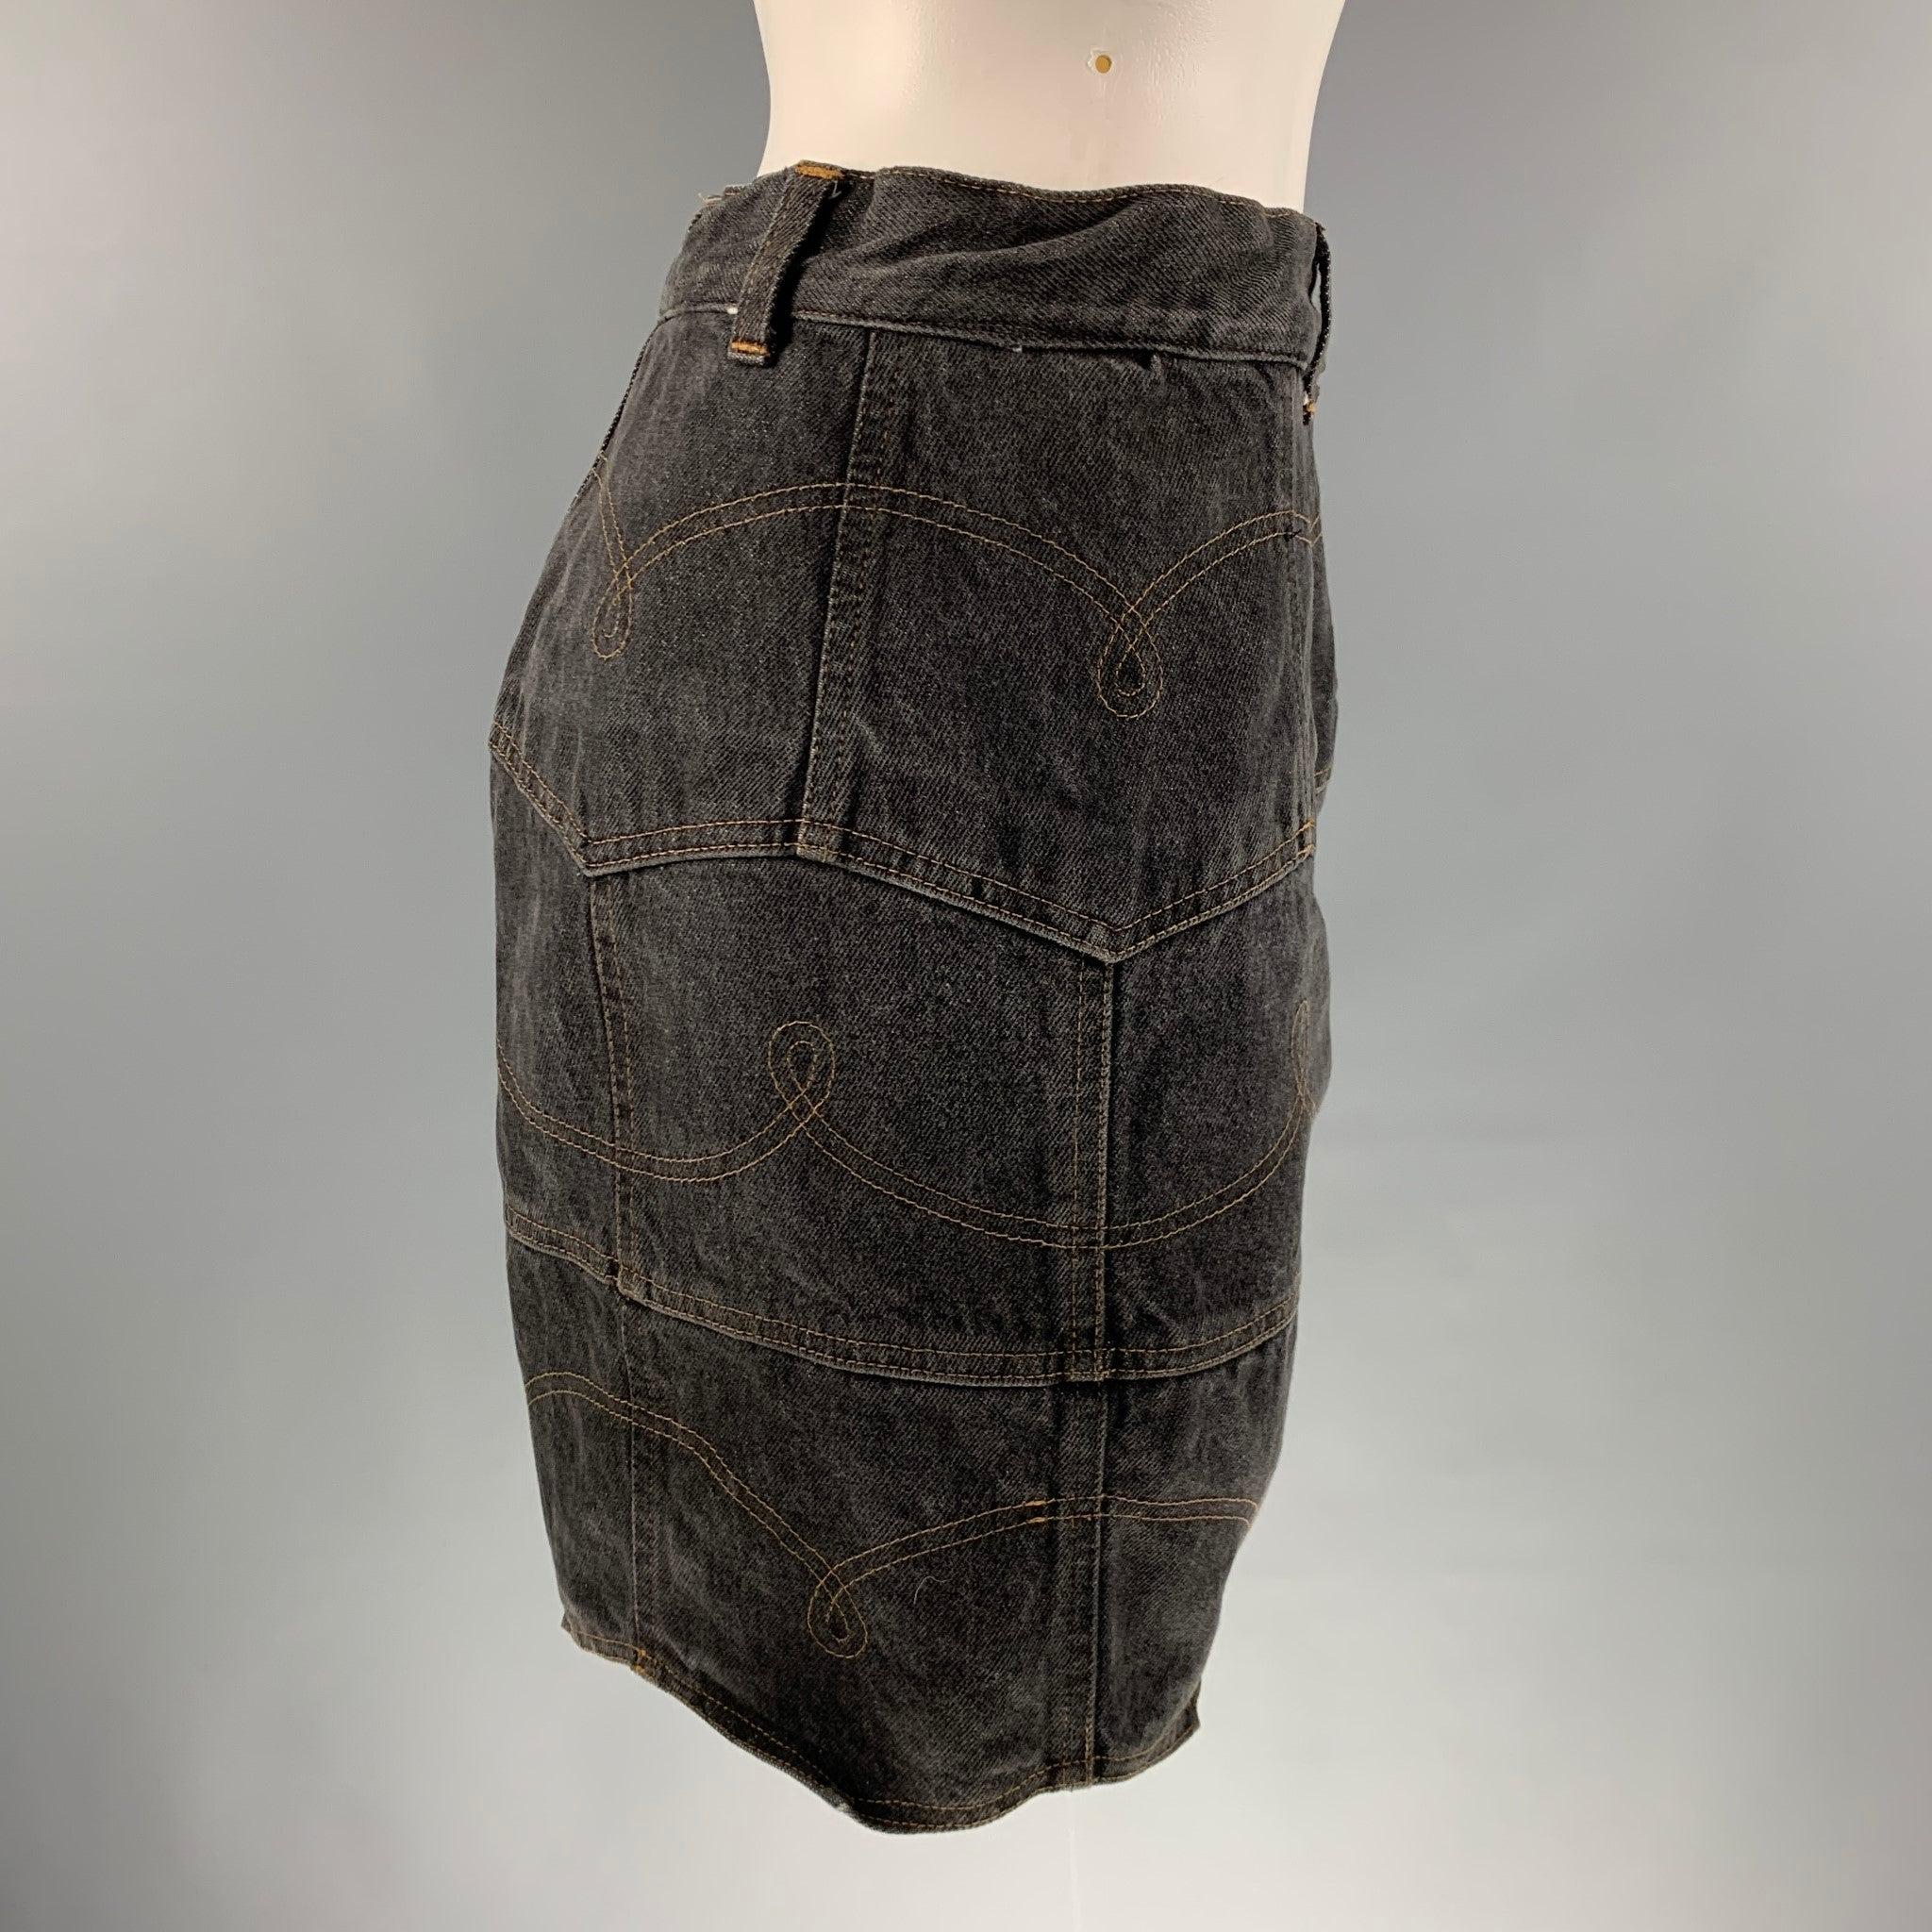 MOSCHINO JEANS skirt comes in a black denim a full liner featuring a mini skirt style, pockets texture, contrast stitching, and a zip up closure. Very Good Pre-Owned Condition. Moderate Signs of wear and Tags removed. 

Marked:   no size marked.